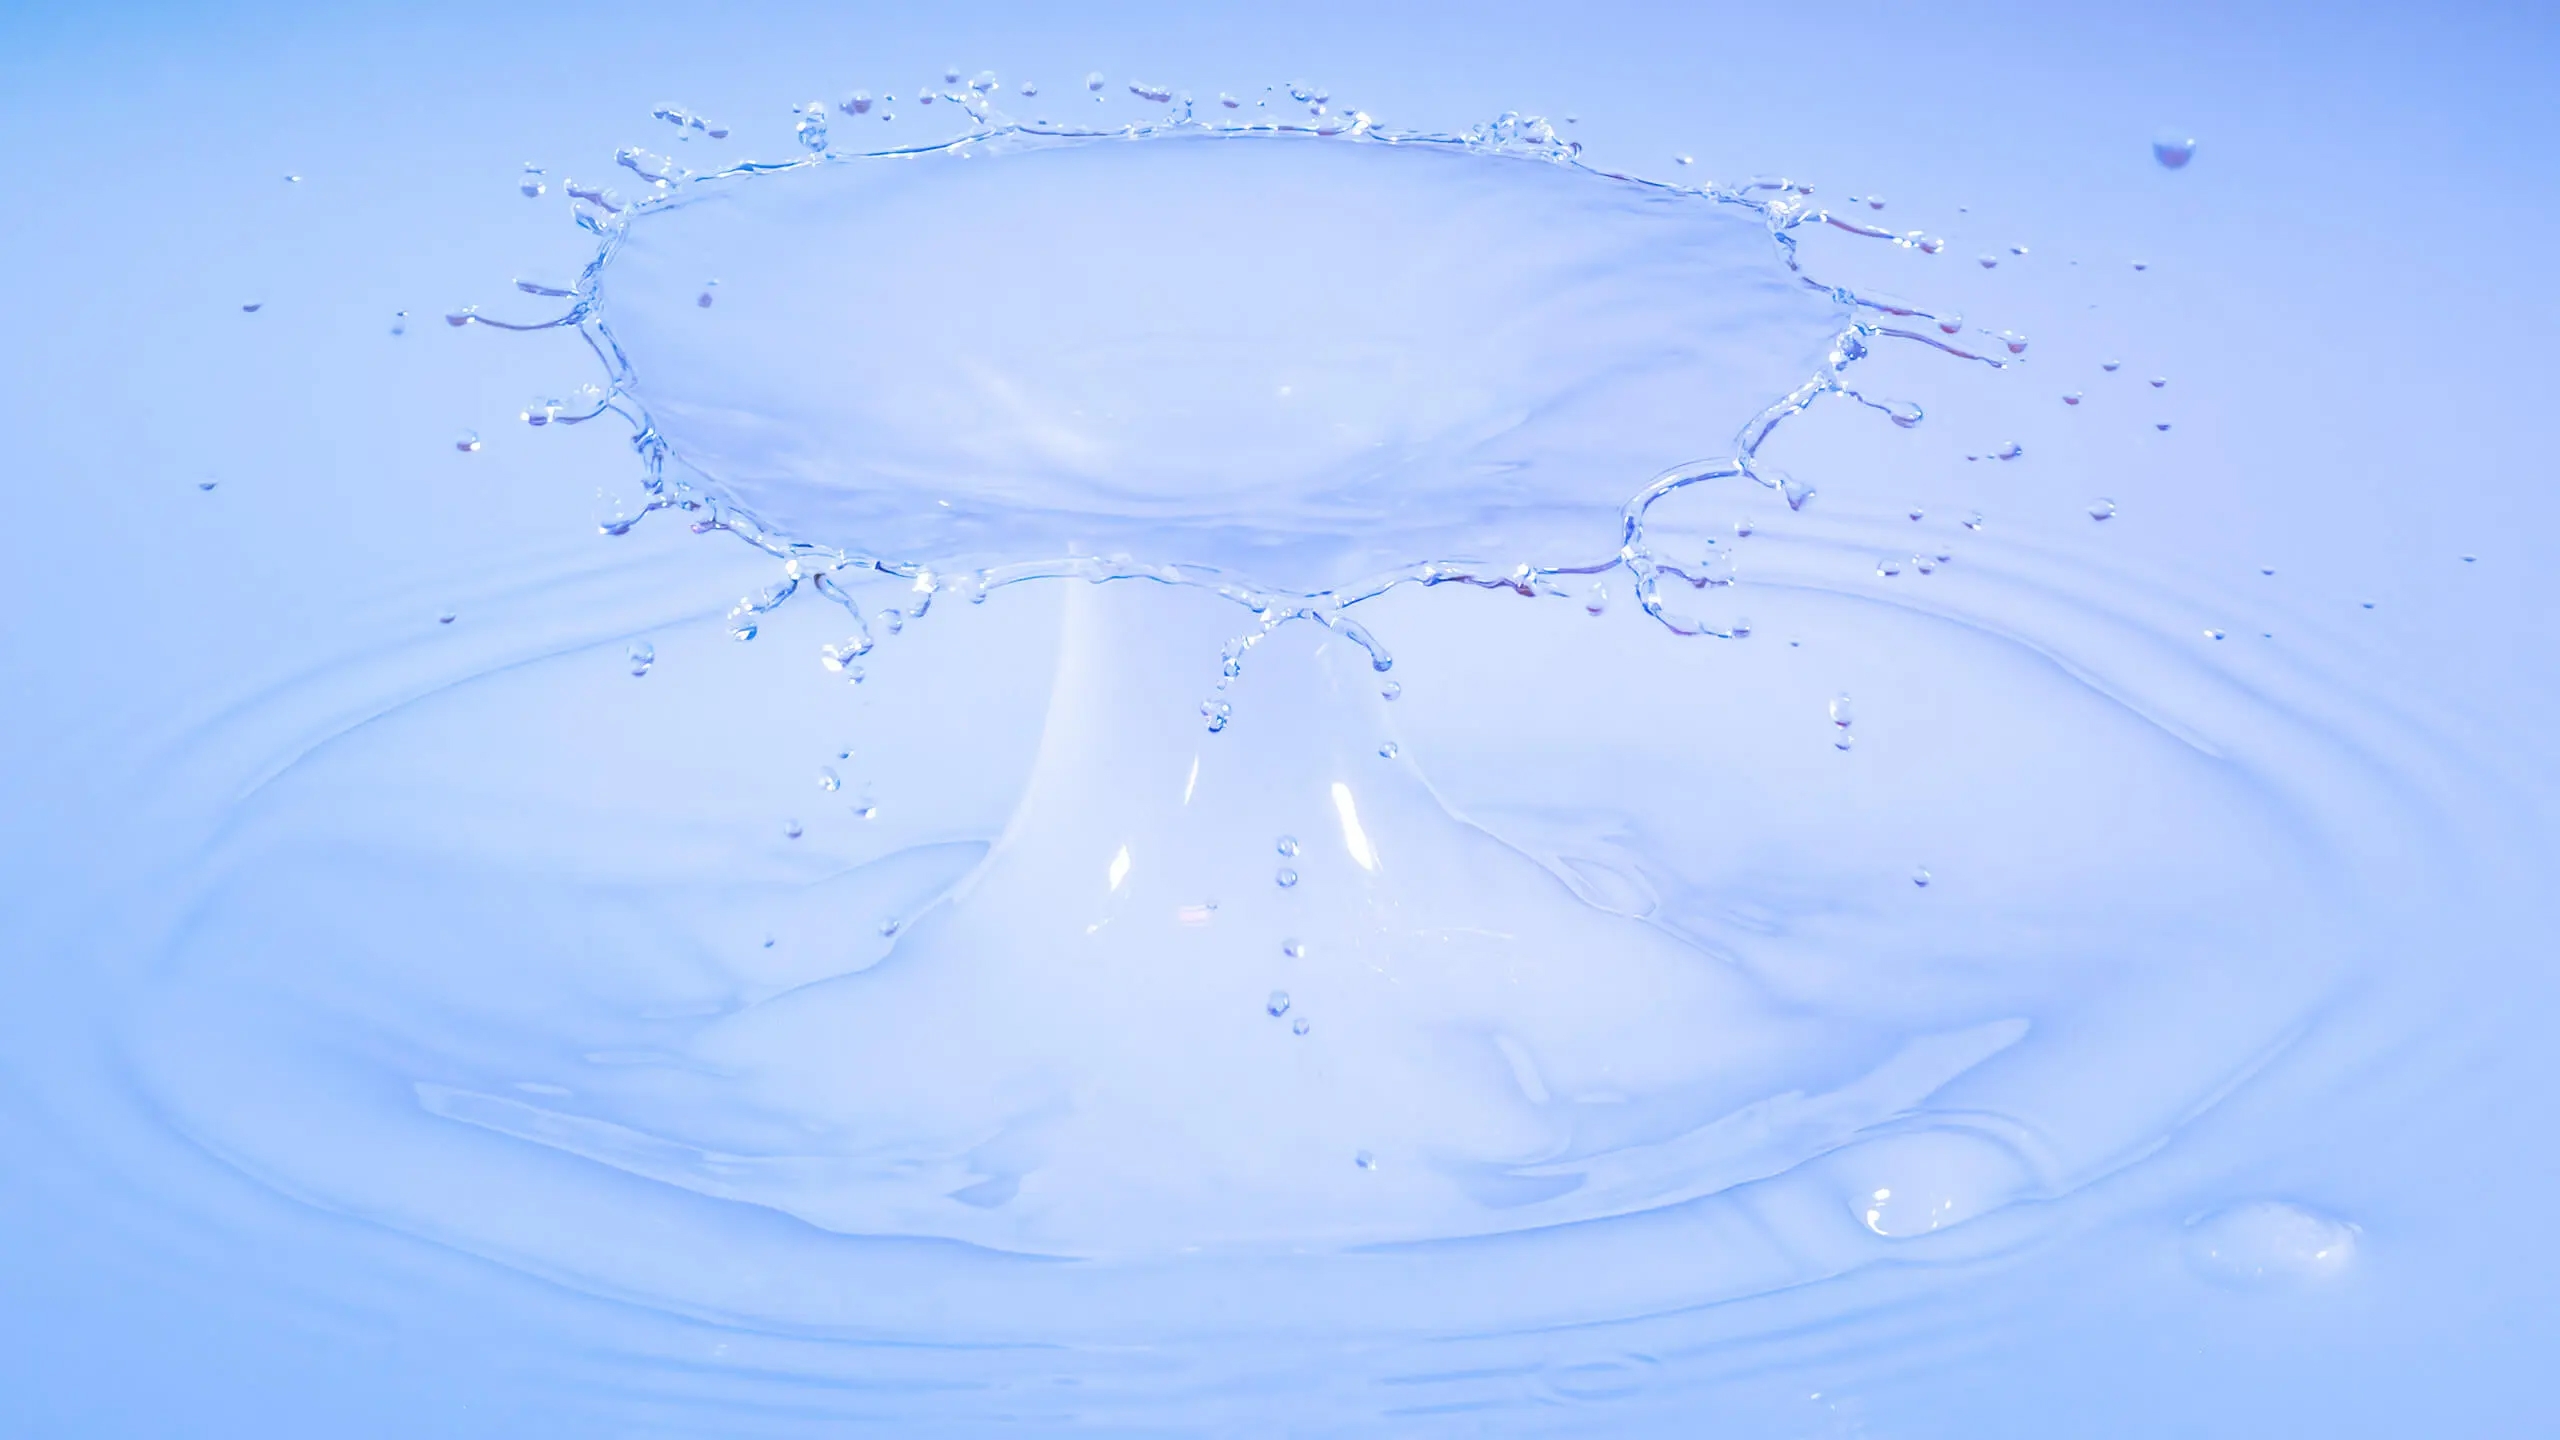 Water Droplets: Time to Capture — from Photofocus